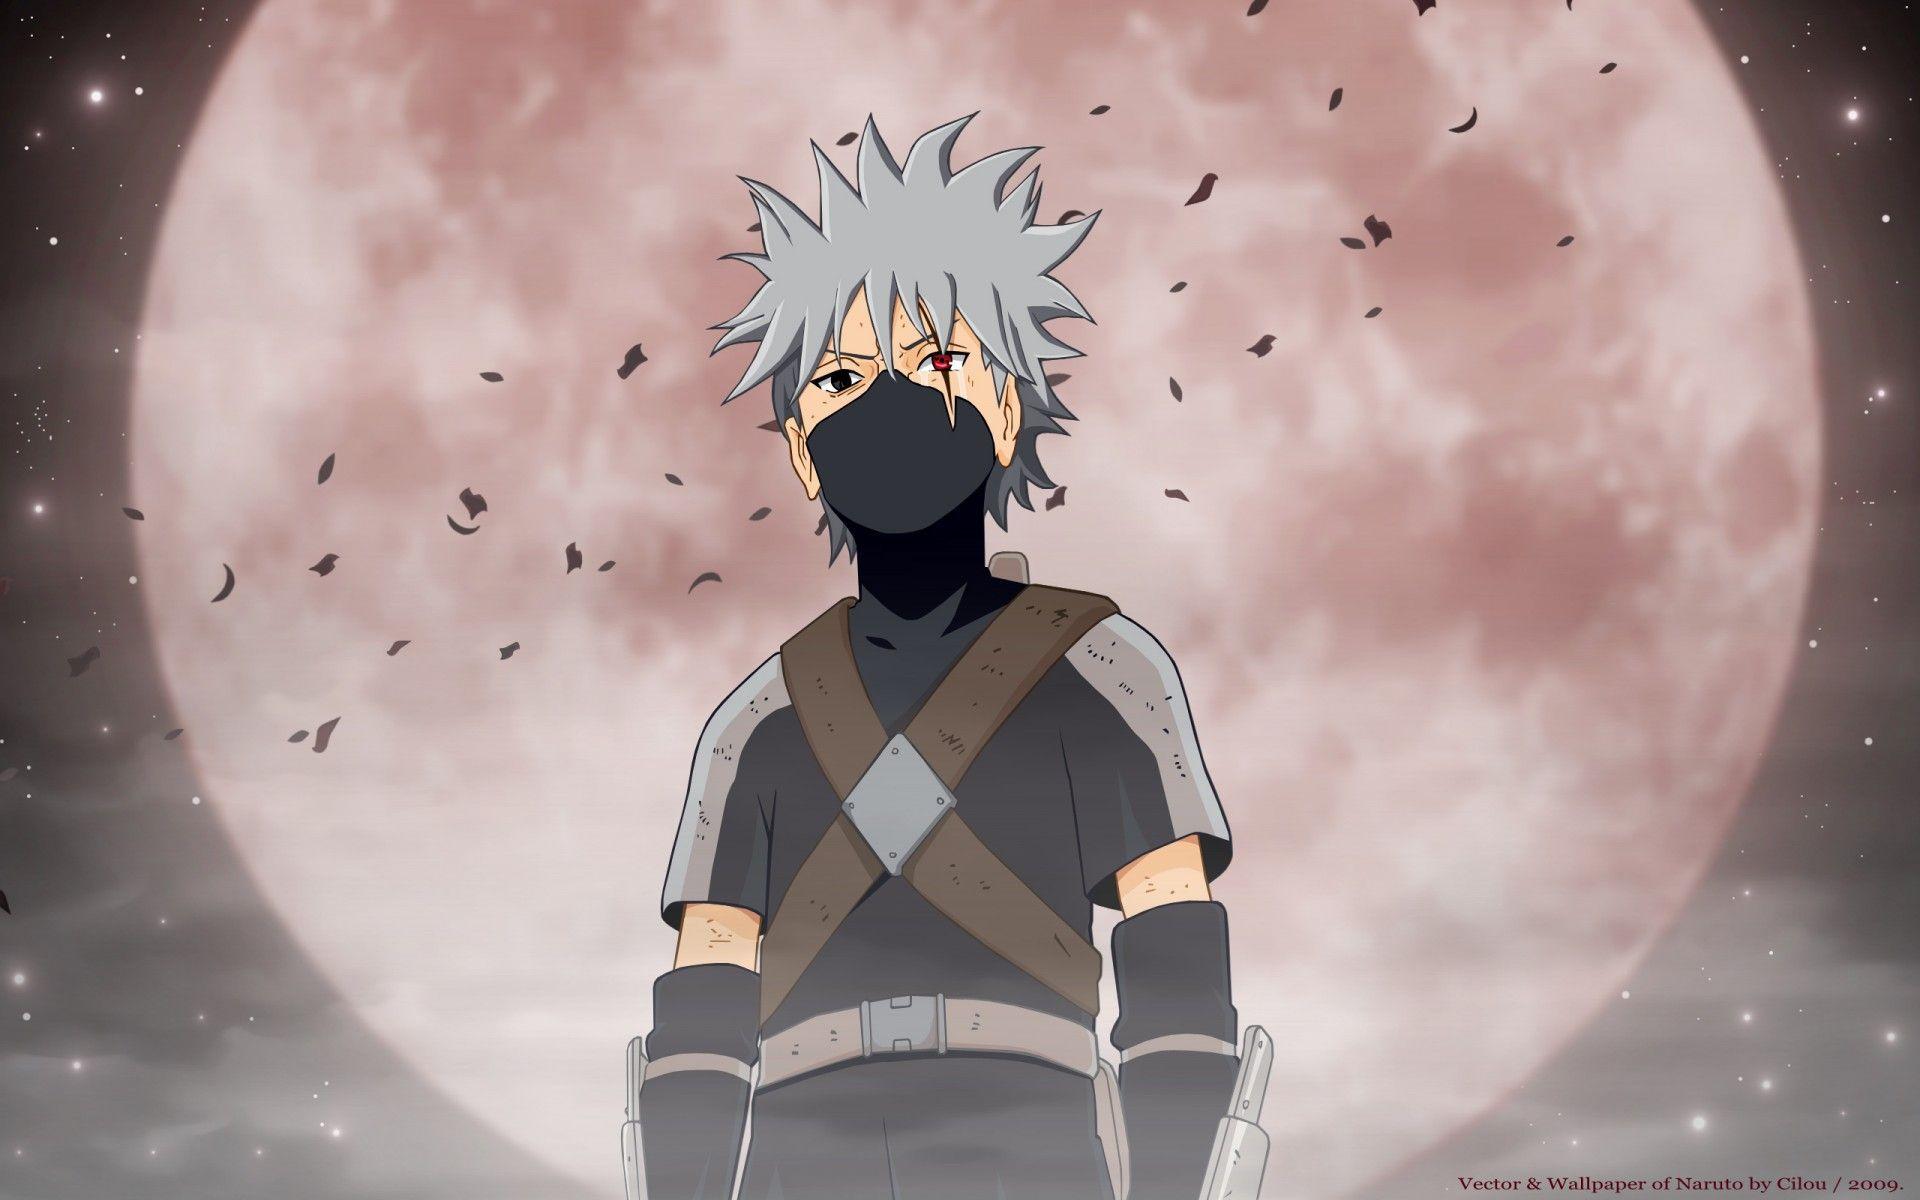 1920x1200 Kakashi Hatake, also known as the 7th Hokage, is a character from the popular anime series Naruto. He is a member of the elite ninja team, the Anbu. - Kakashi Hatake